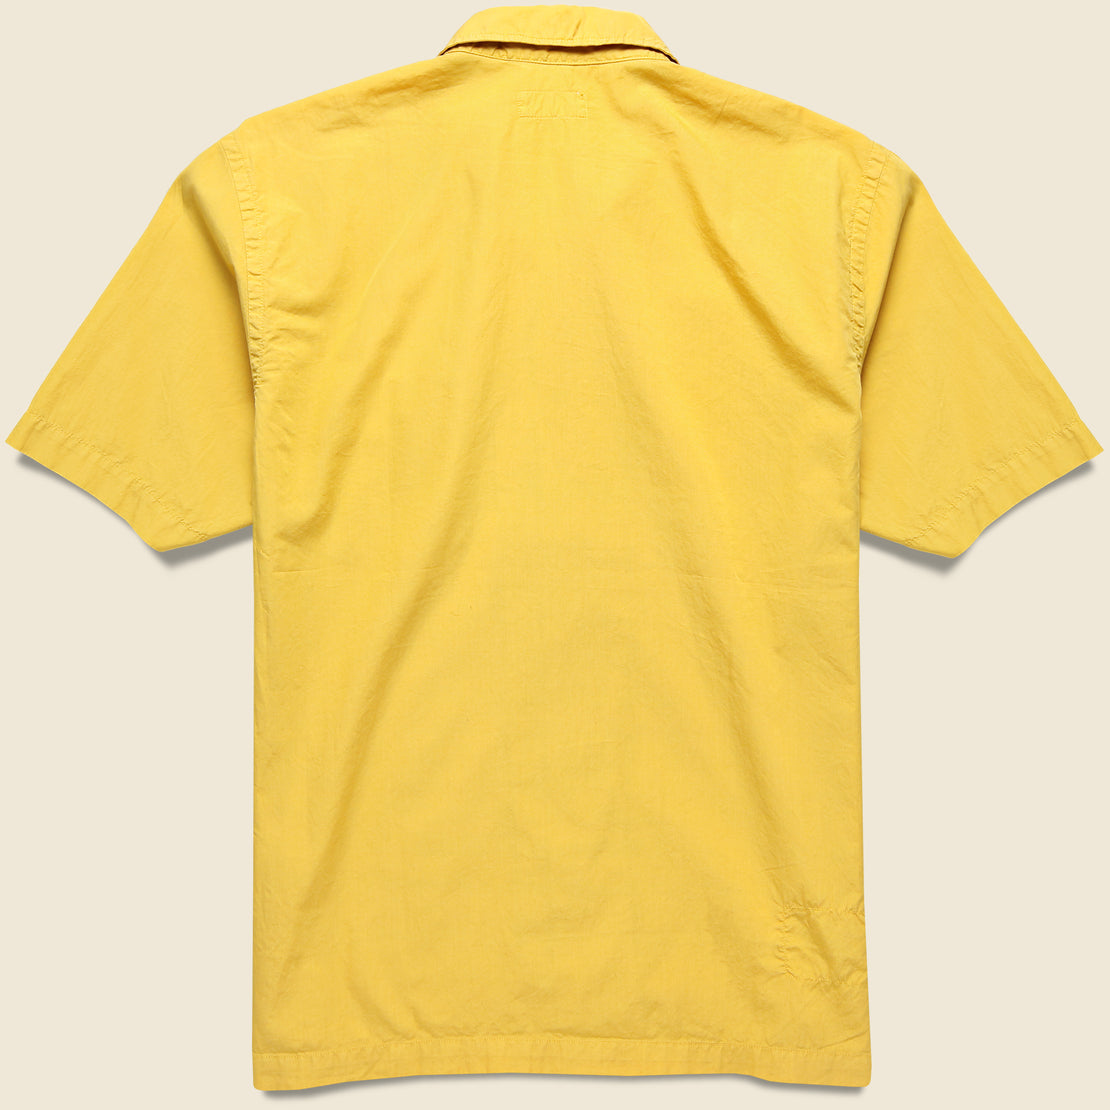 Organic Poplin Road Shirt - Gold - Universal Works - STAG Provisions - Tops - S/S Woven - Solid